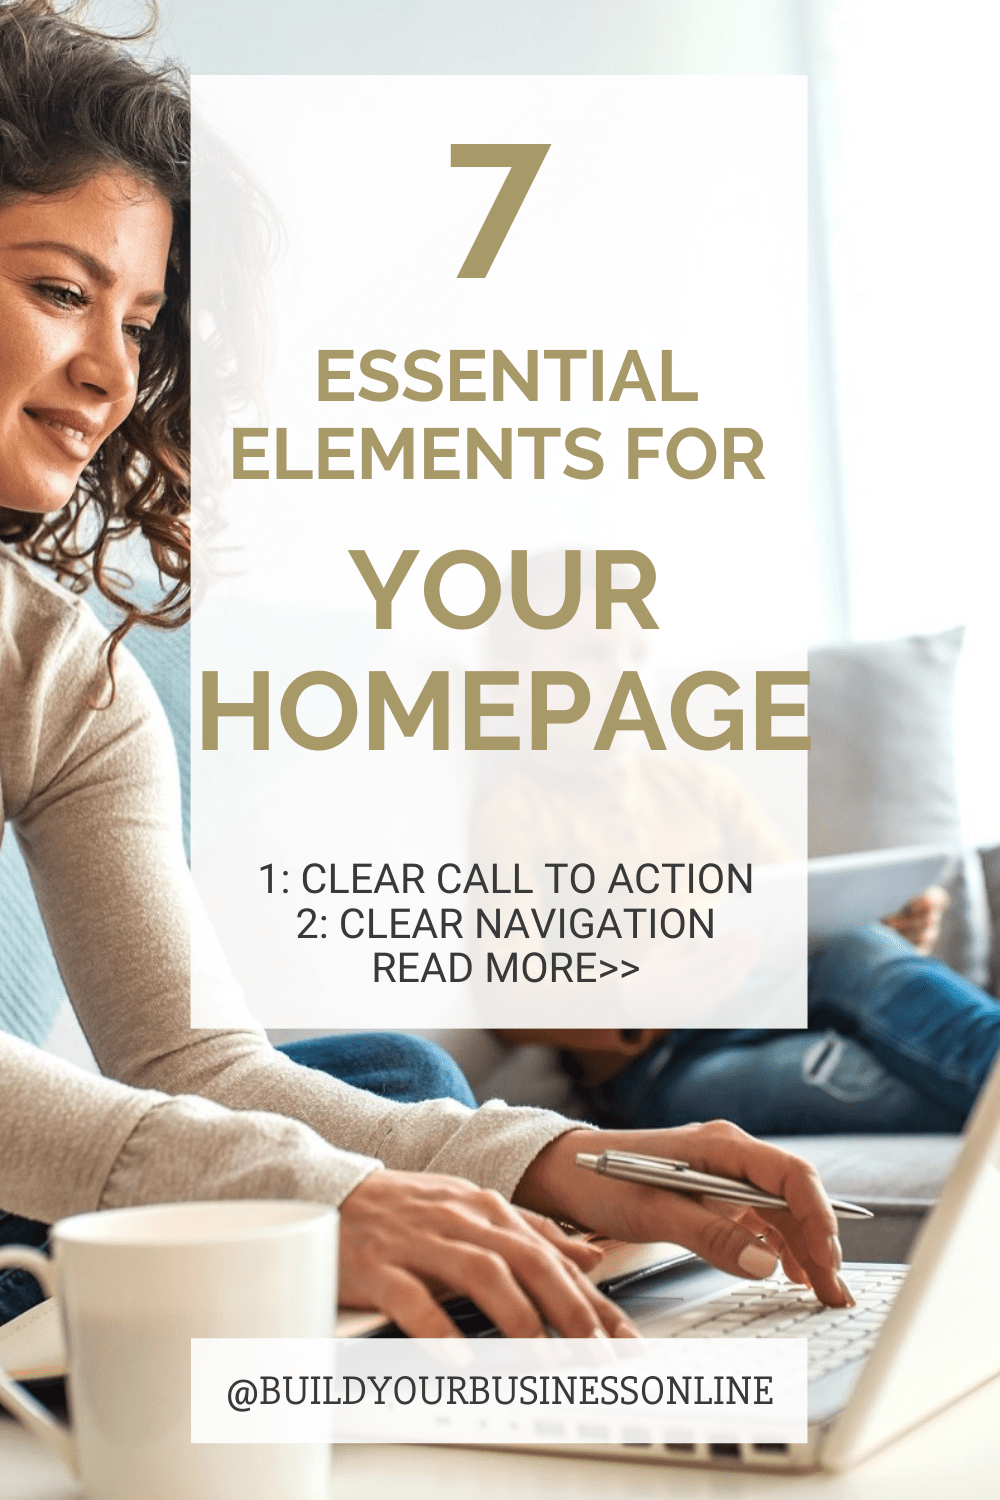 Essential elements for the homepage